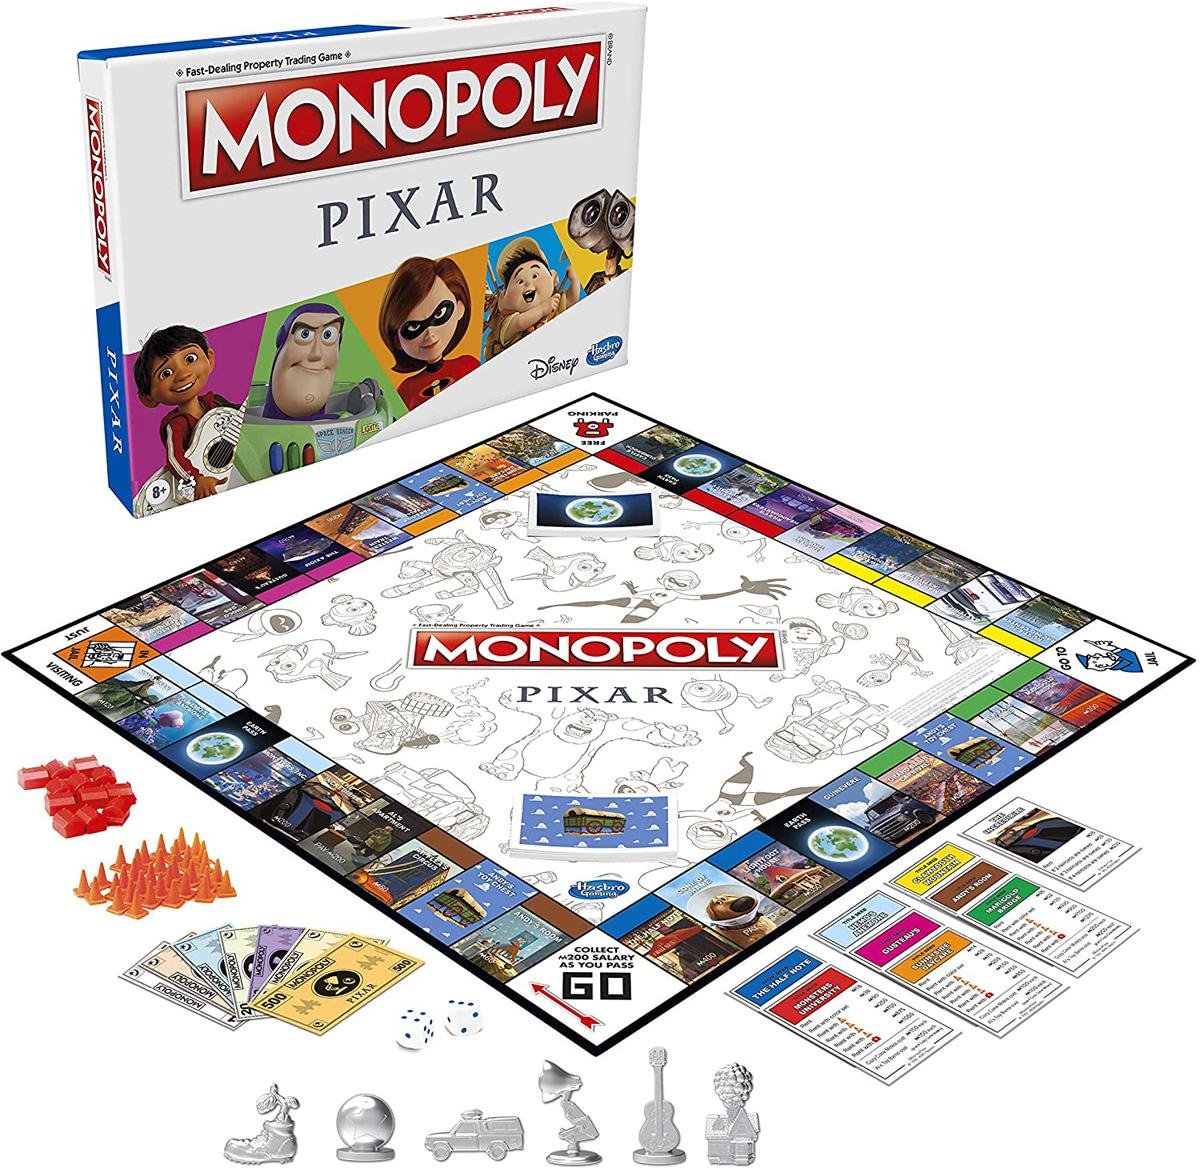 Monopoly Pixar Edition Board Game for $13.99